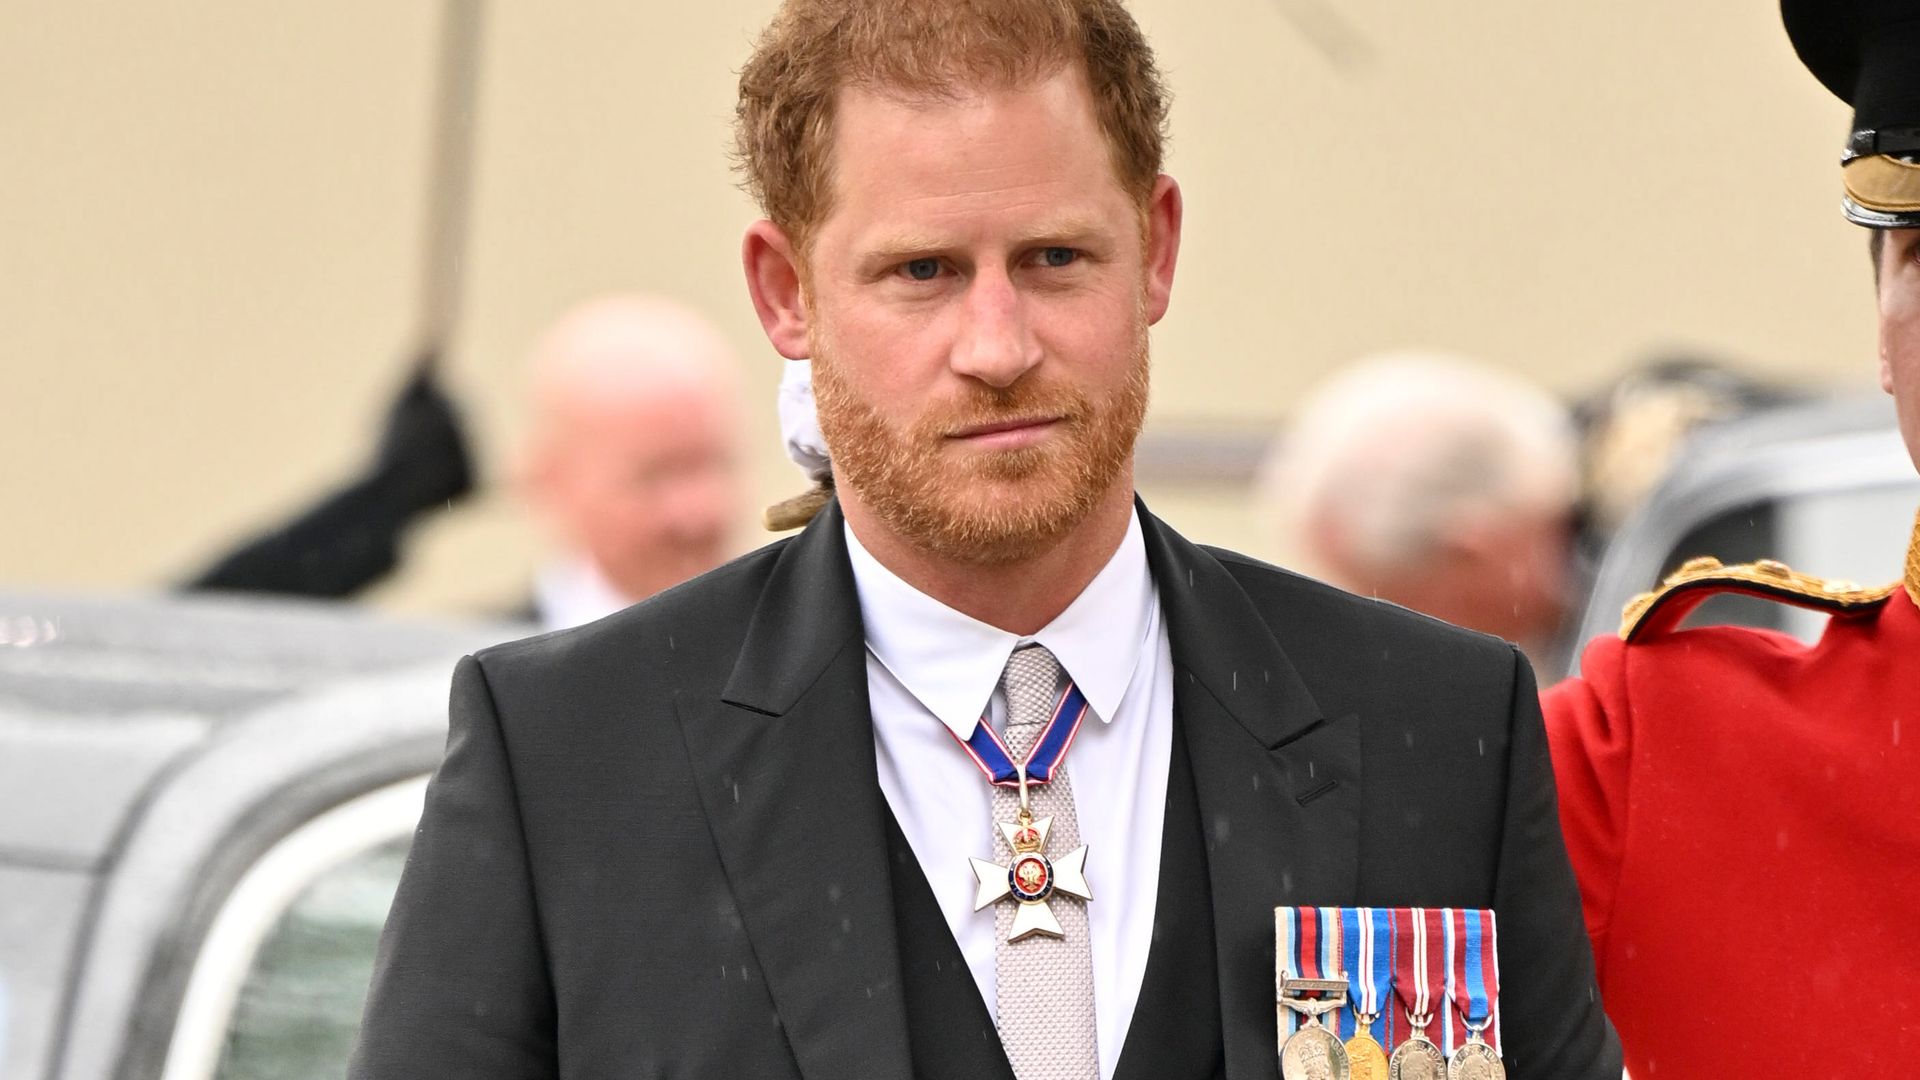 Prince Harry, Duke of Sussex arrives for the Coronation of King Charles III and Queen Camilla at Westminster Abbey on May 6, 2023 in London, England. The Coronation of Charles III and his wife, Camilla, as King and Queen of the United Kingdom of Great Britain and Northern Ireland, and the other Commonwealth realms takes place at Westminster Abbey today. Charles acceded to the throne on 8 September 2022, upon the death of his mother, Elizabeth II. (Photo by Andy Stenning  - WPA Pool/Getty Images)